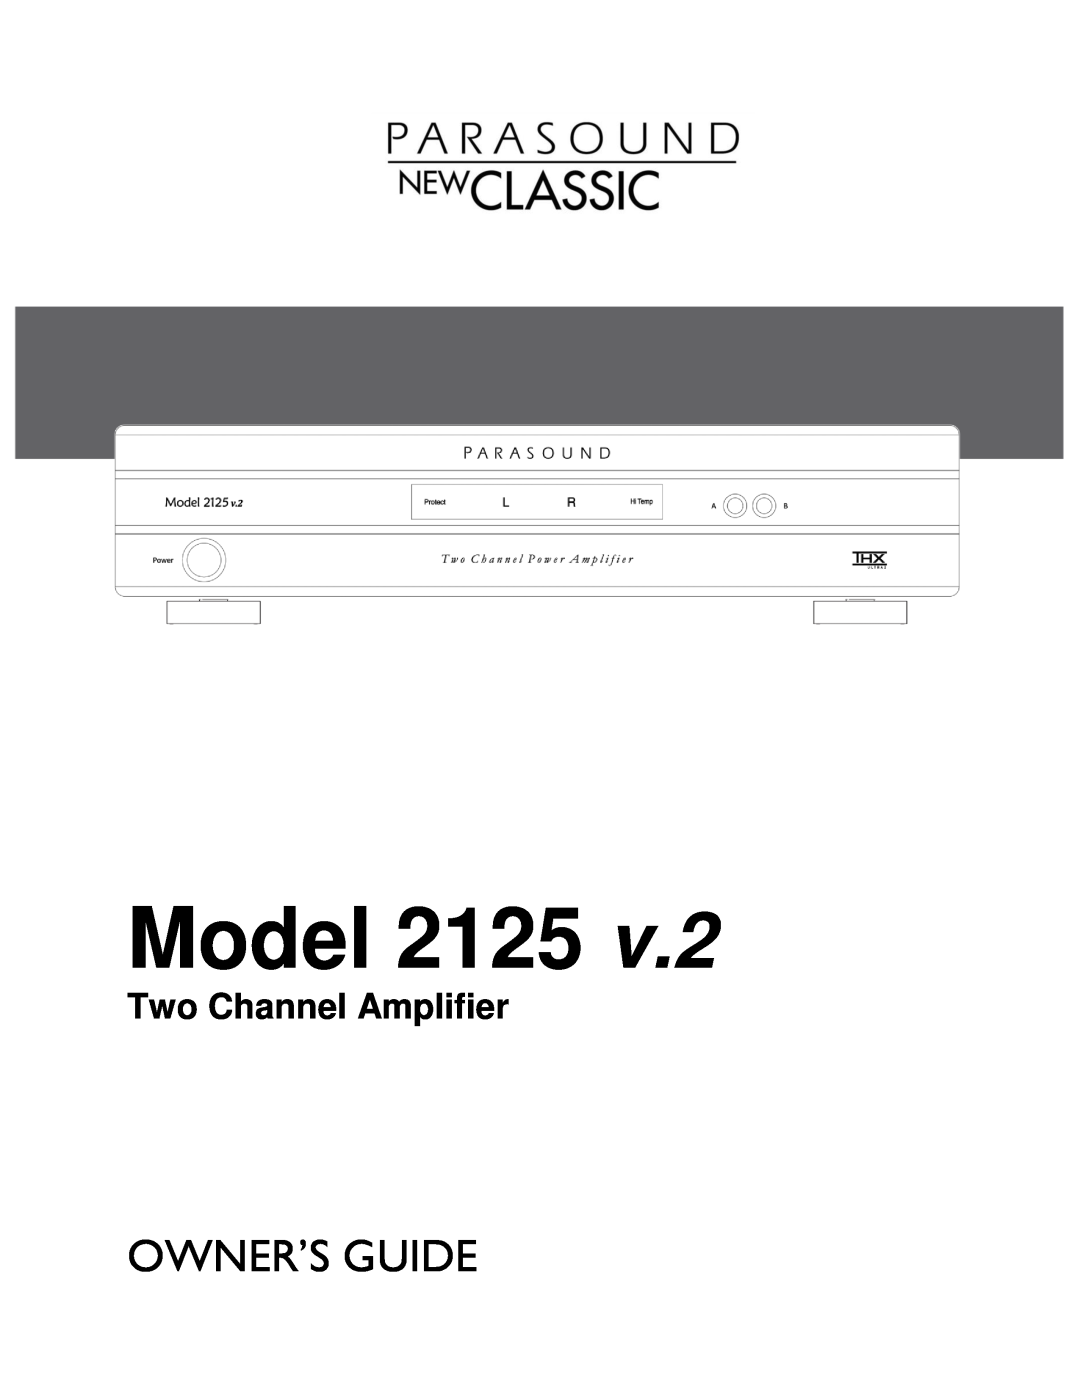 Parasound 2125 V.2 manual Model, Owner’S Guide, Two Channel Amplifier 